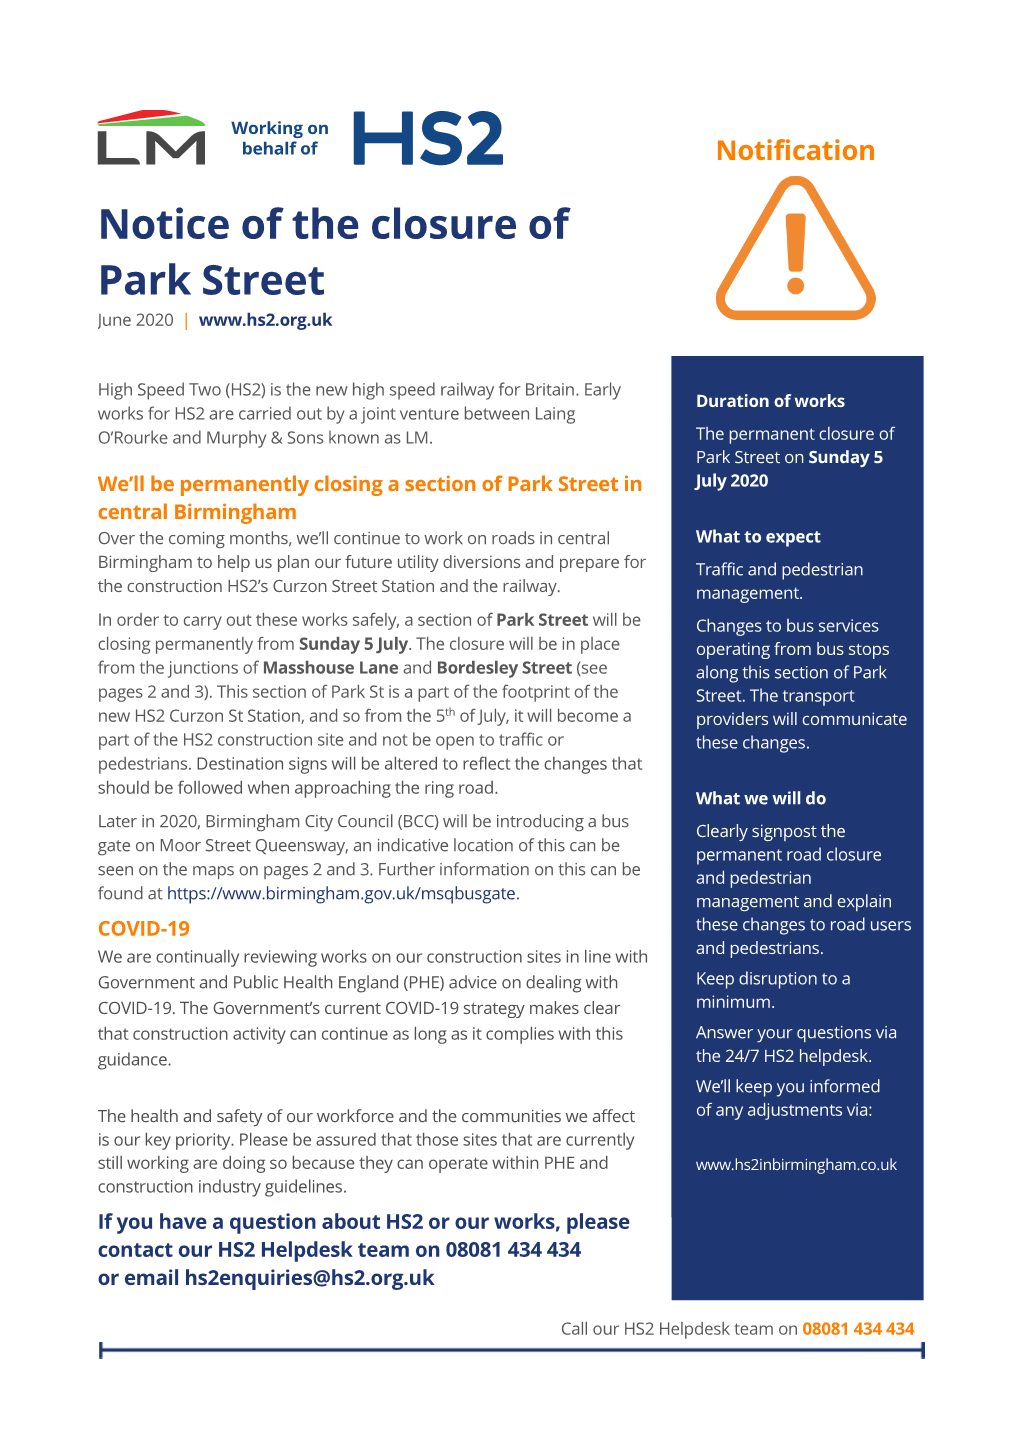 Notice of the Closure of Park Street June 2020 |